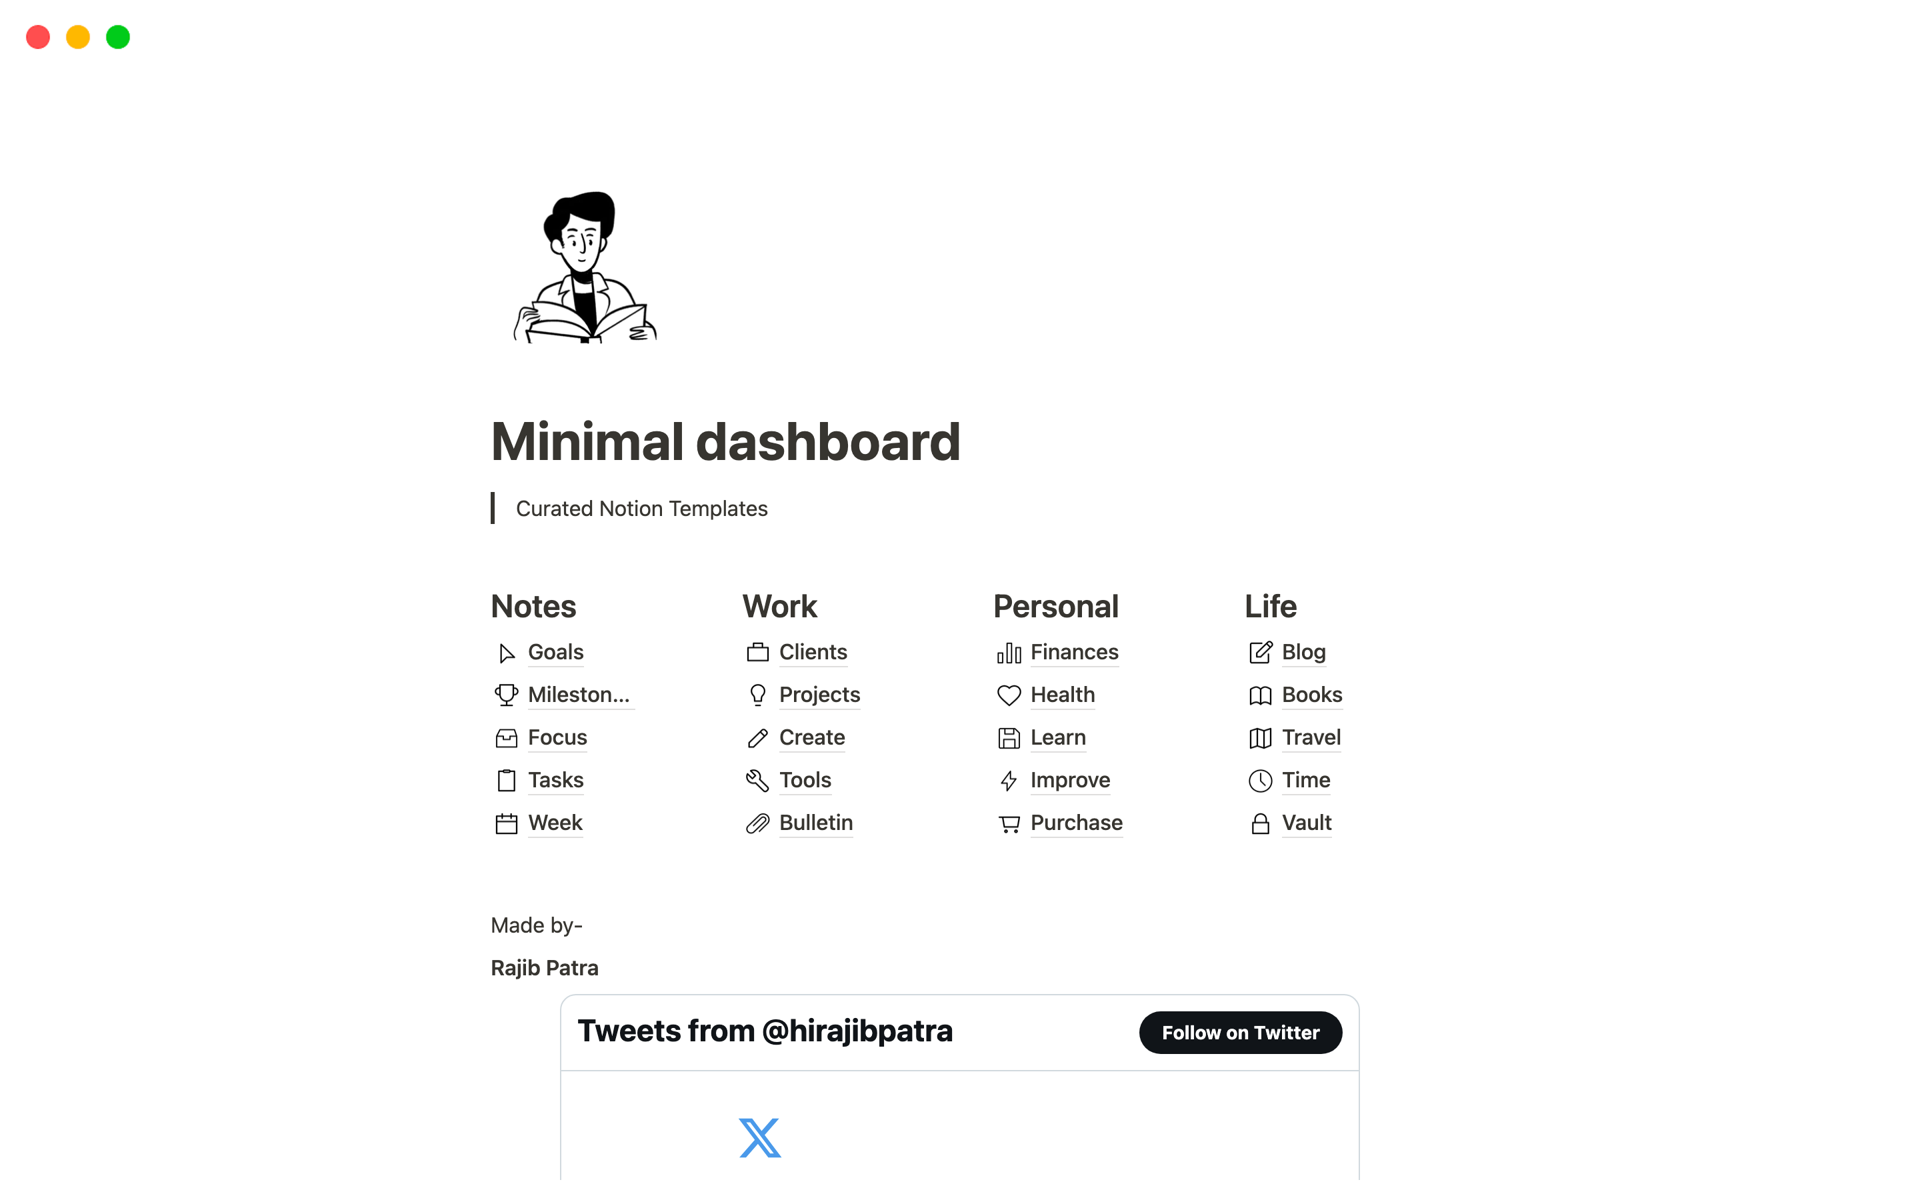 This is a Minimalist Dashboard